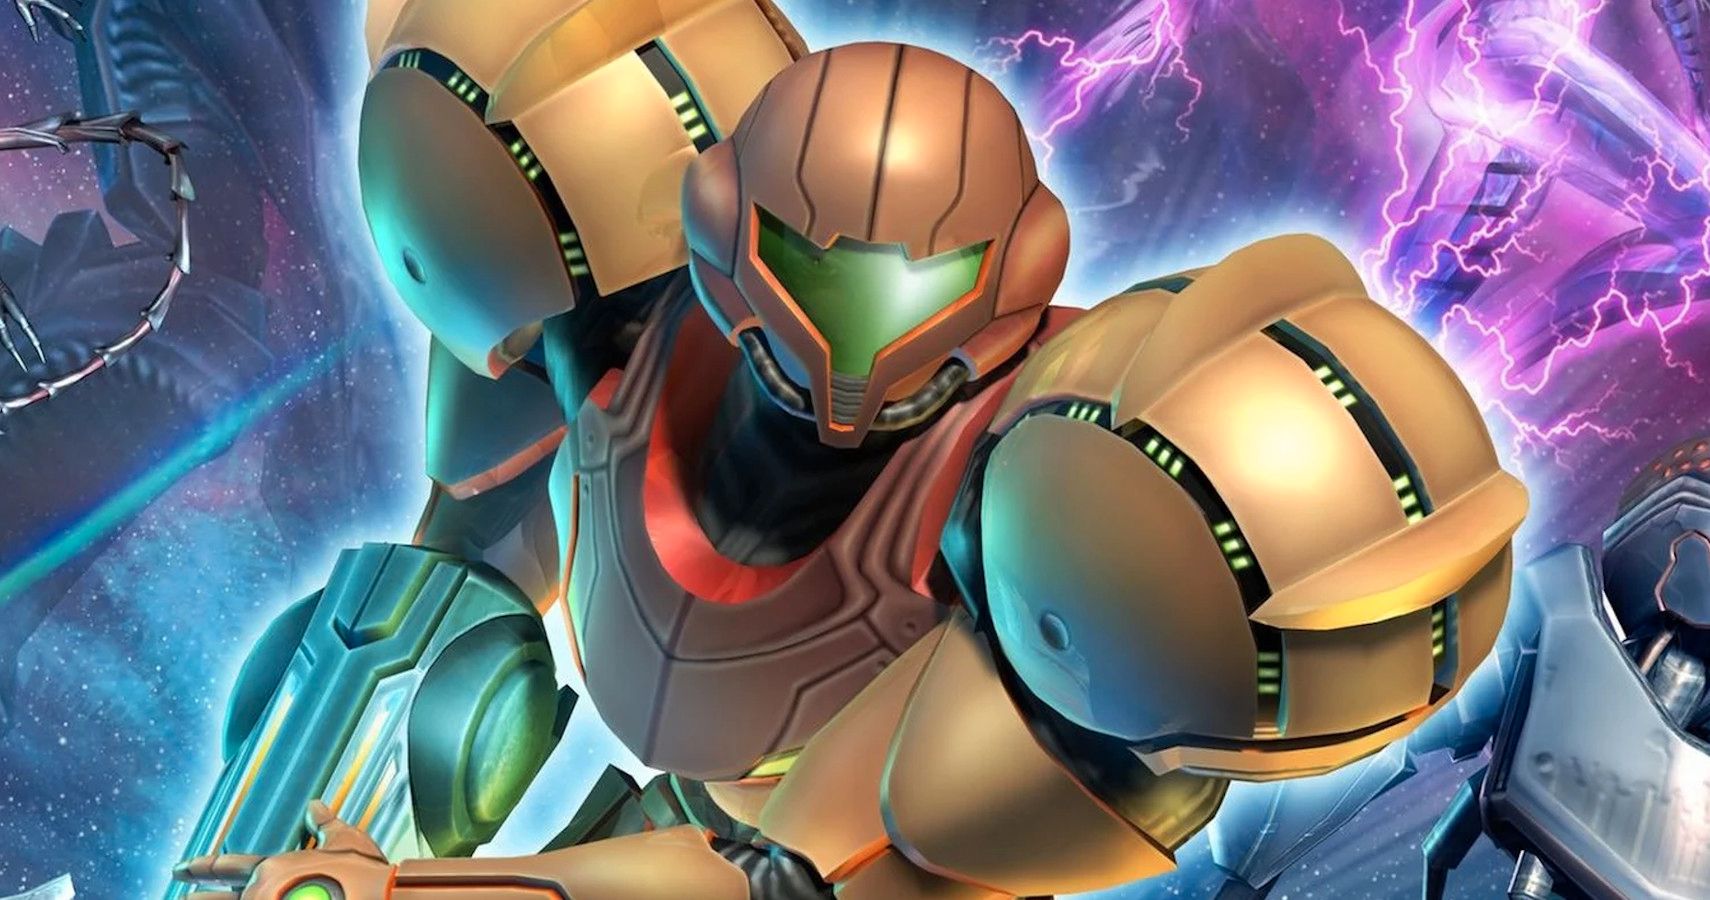 Retro Studios prototyped Metroid Prime as a third-person shooter, but Nintendo insisted on making it first-person to appeal to the West